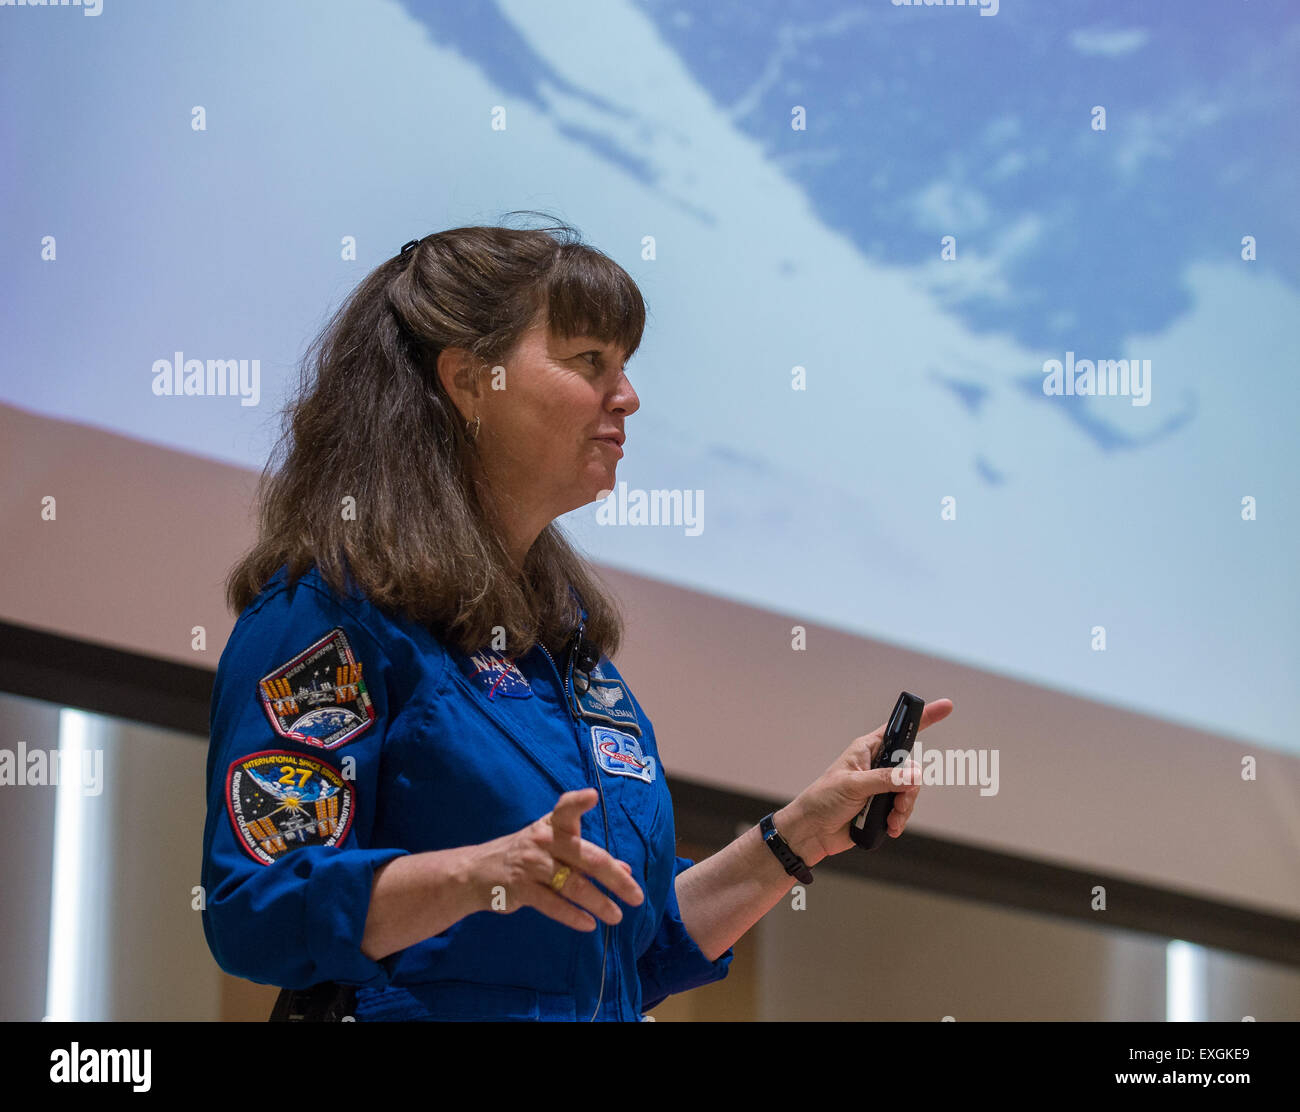 NASA astronaut Cady Coleman speaks to attendees of the TouchTomorrow Festival, held in conjunction with the 2015 Sample Return Robot Challenge, Saturday, June 13, 2015 at the Worcester Polytechnic Institute (WPI) in Worcester, Mass.  Sixteen teams competed for a $1.5 million NASA prize purse. Teams will be required to demonstrate autonomous robots that can locate and collect samples from a wide and varied terrain, operating without human control. The objective of this NASA-WPI Centennial Challenge is to encourage innovations in autonomous navigation and robotics technologies. Innovations stemm Stock Photo